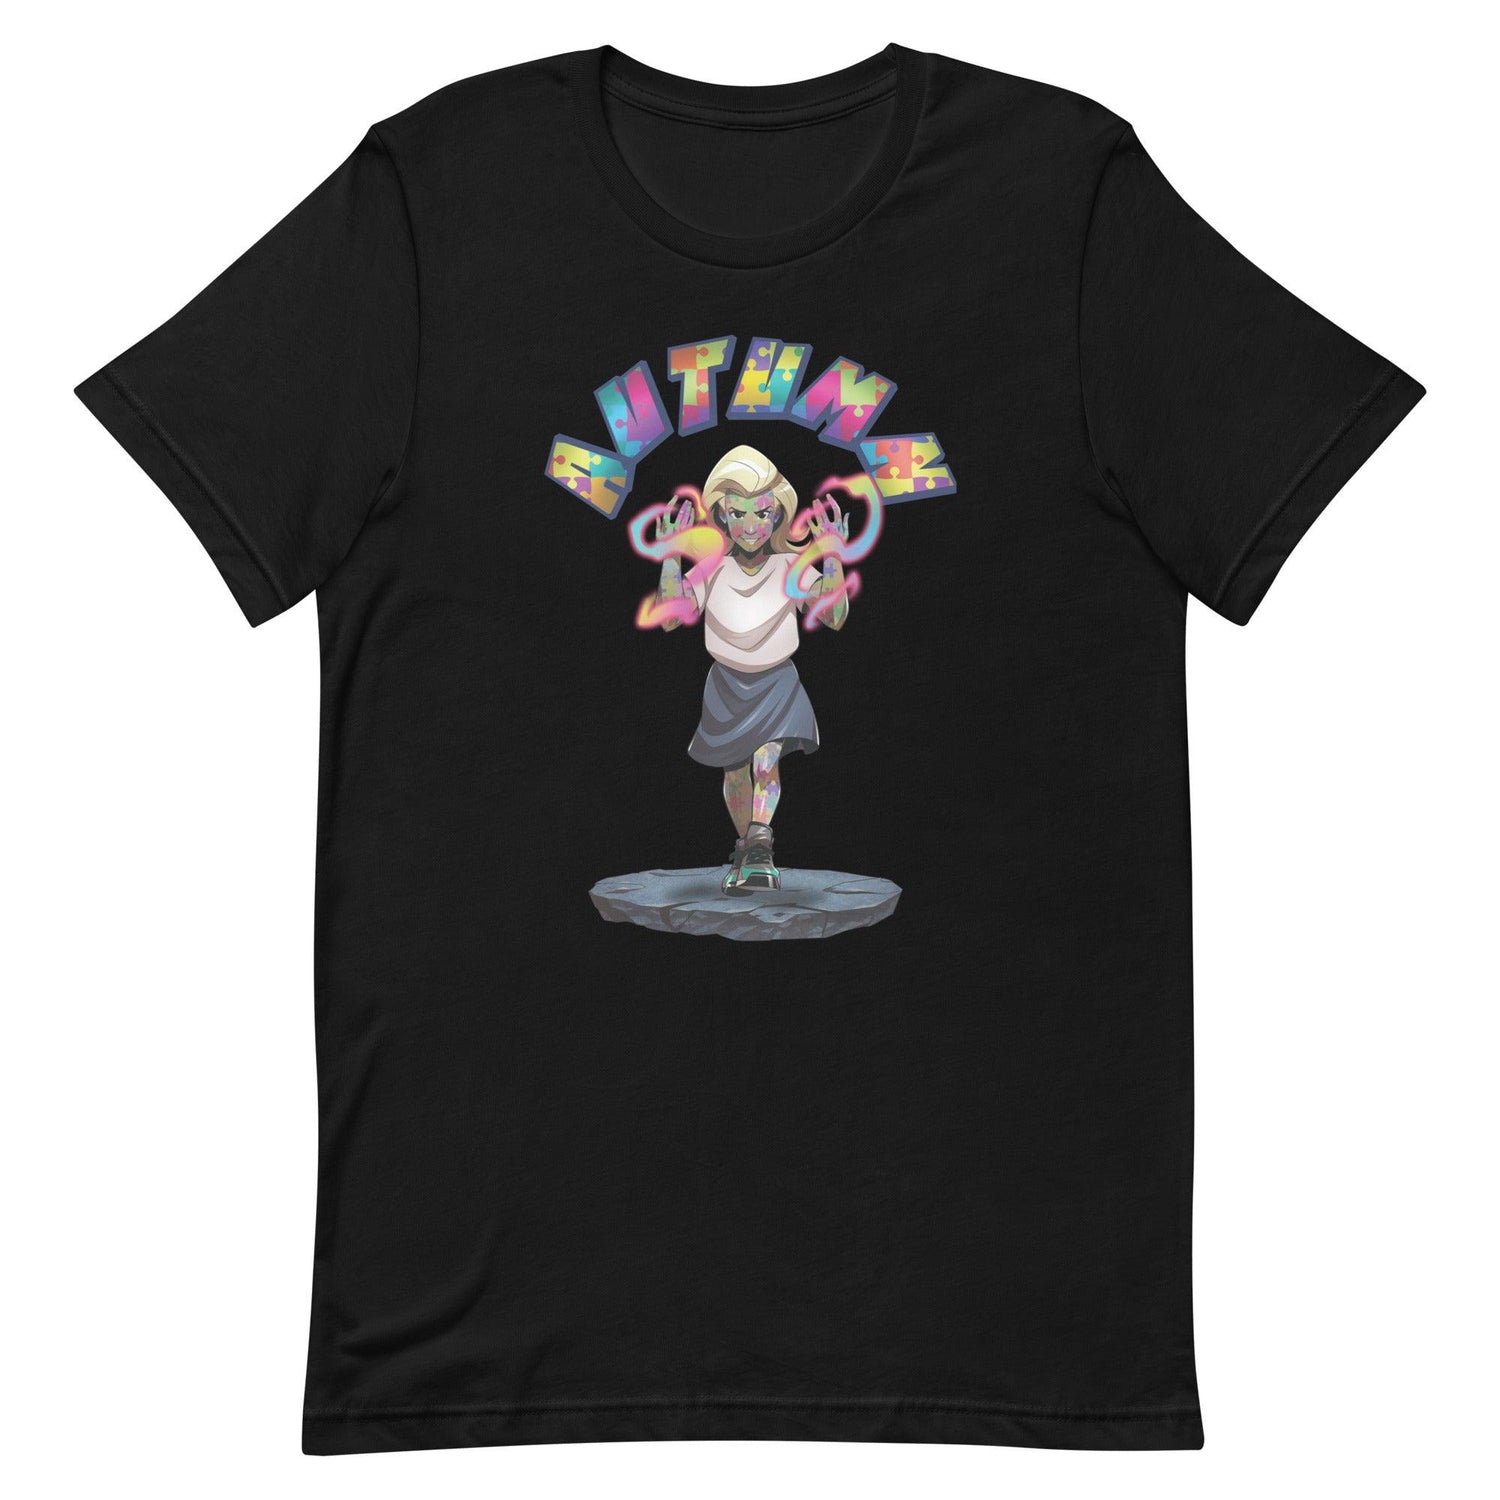 Gary Forbes "Ausome" t-shirt - Fan Arch